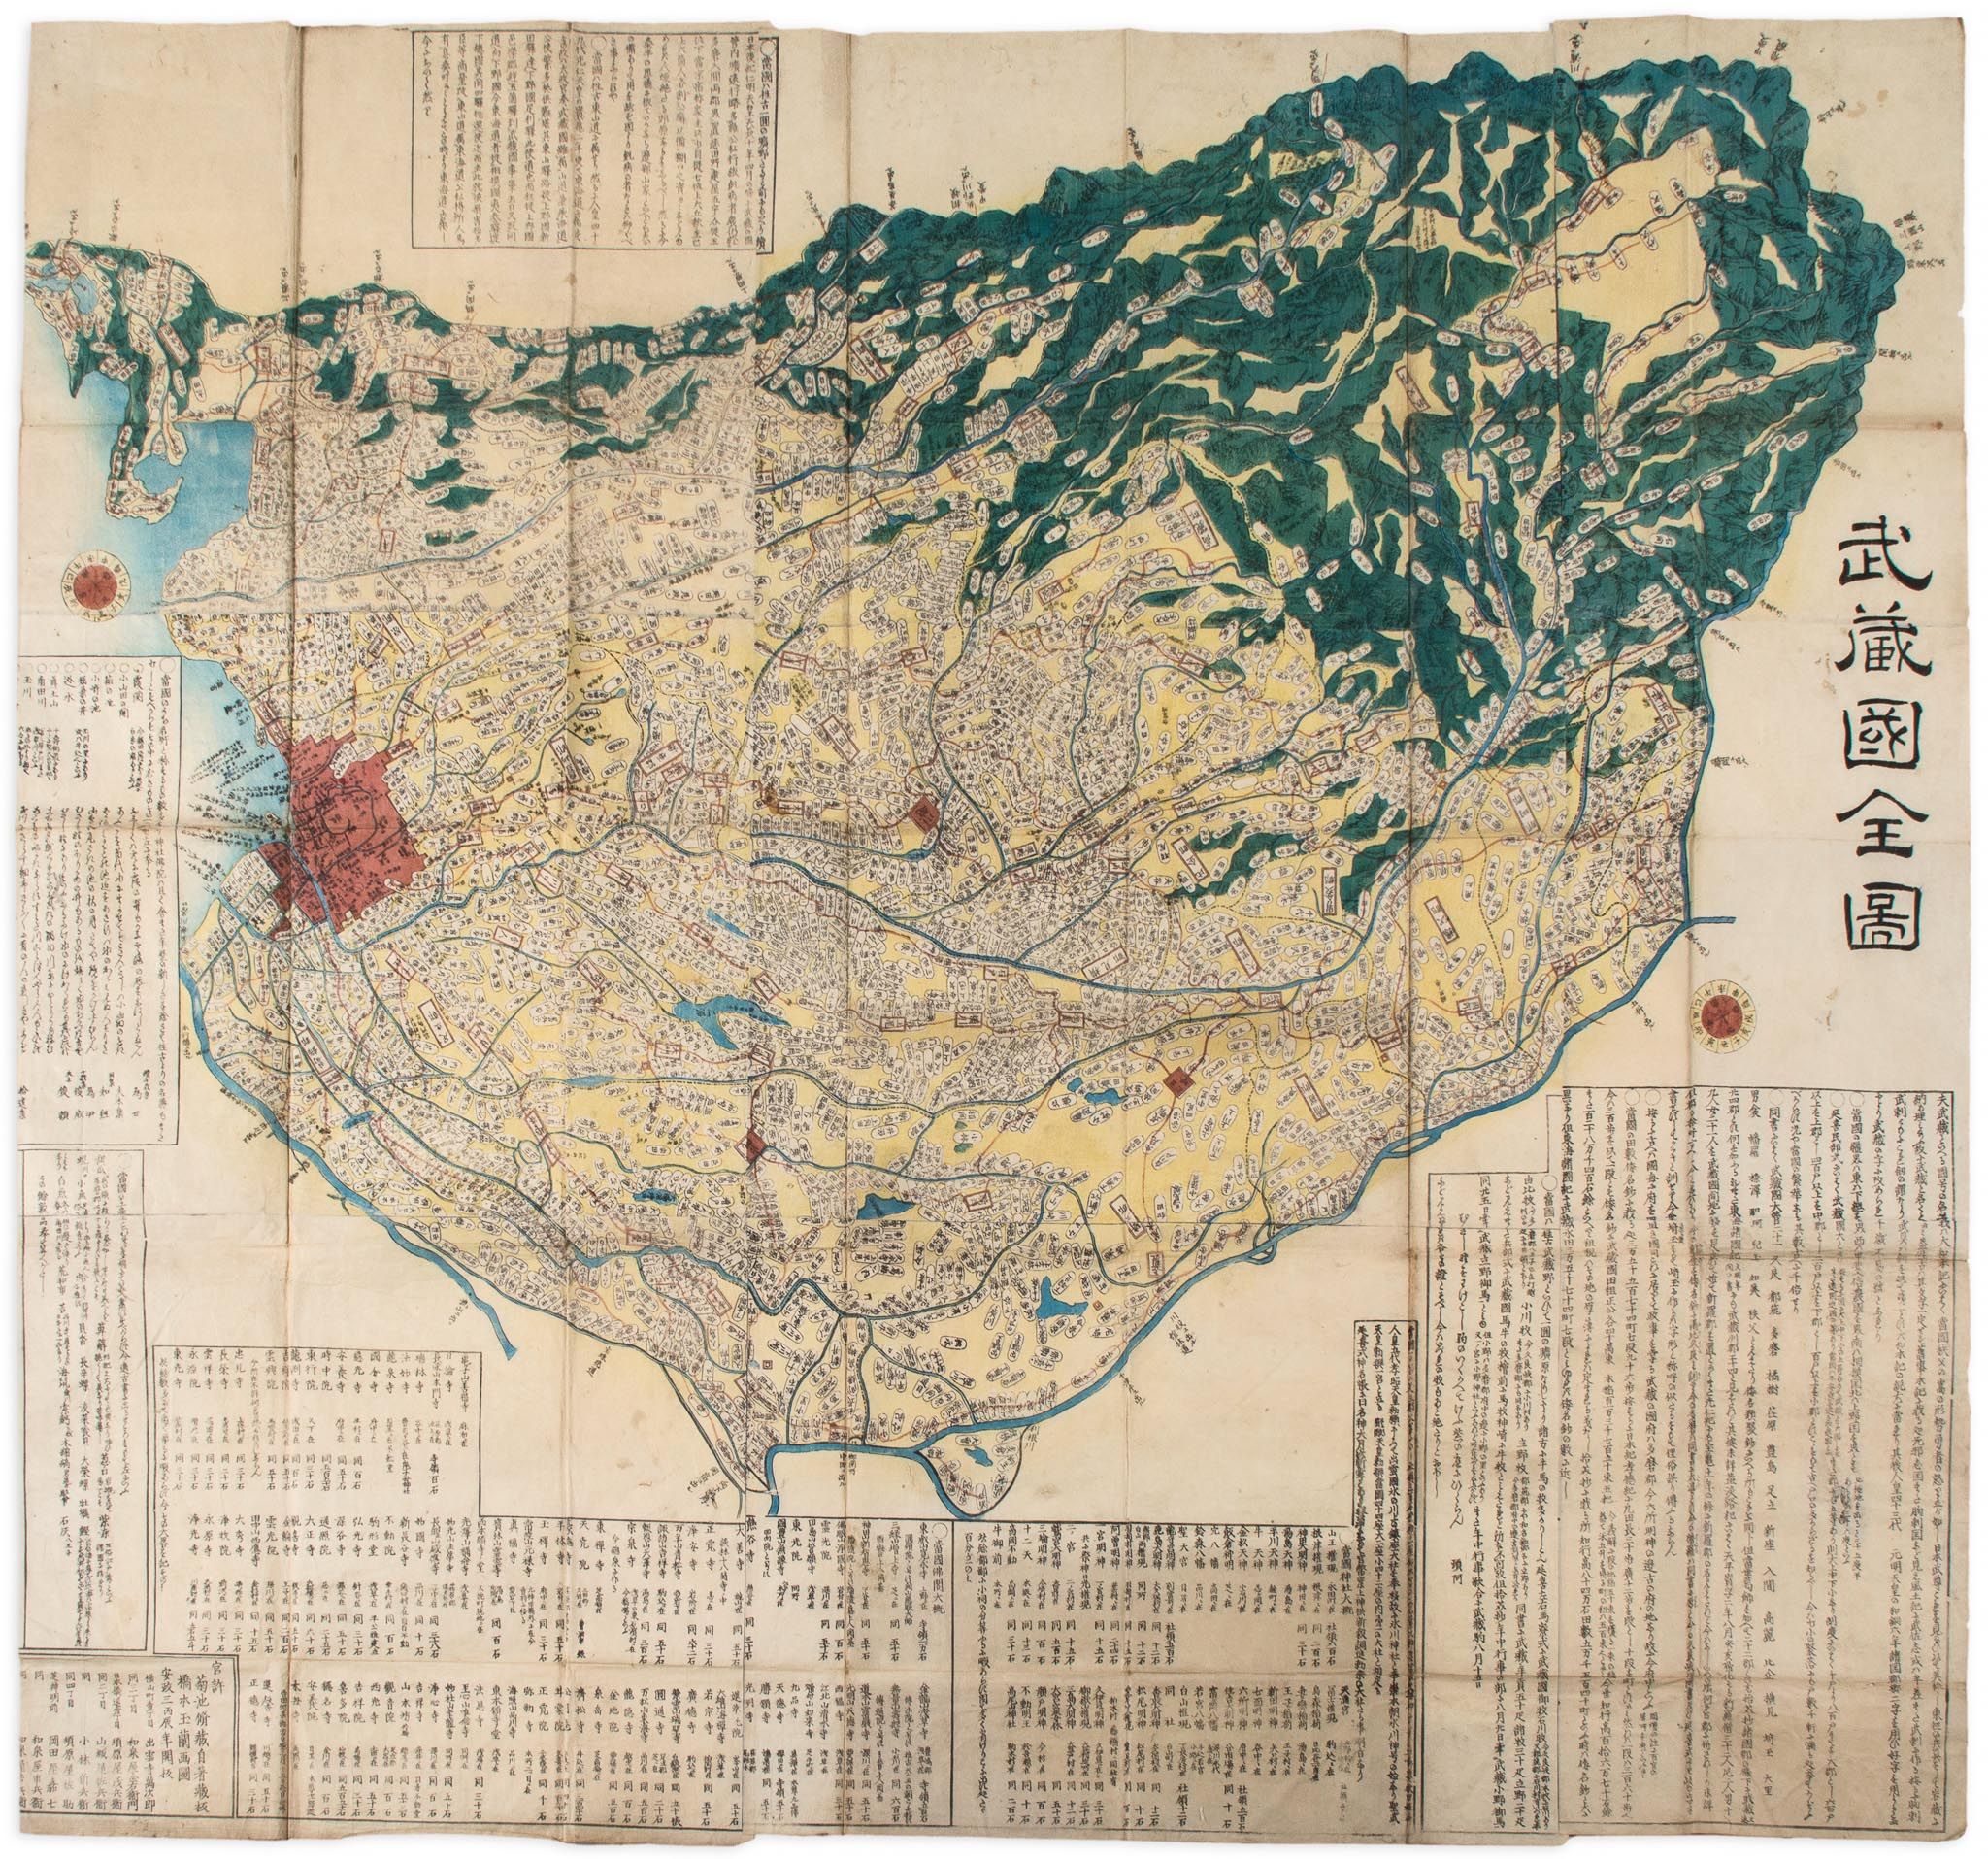 Ino (Tadataka) - A large map of Musashi province, showing Edo, or Tokyo, with extensive text